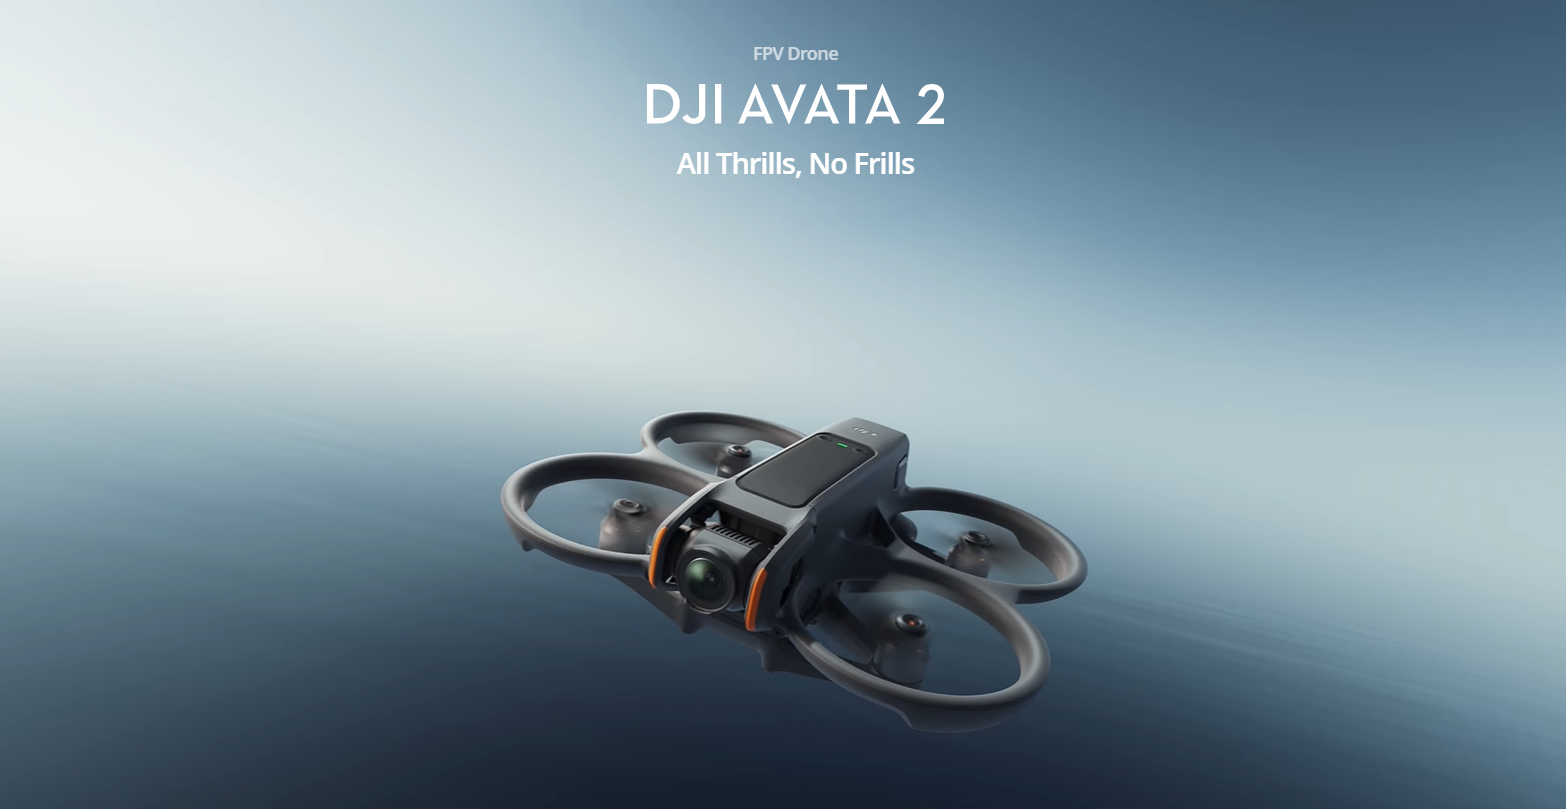 DJI Avata 2: The FPV drone gets better updates and features